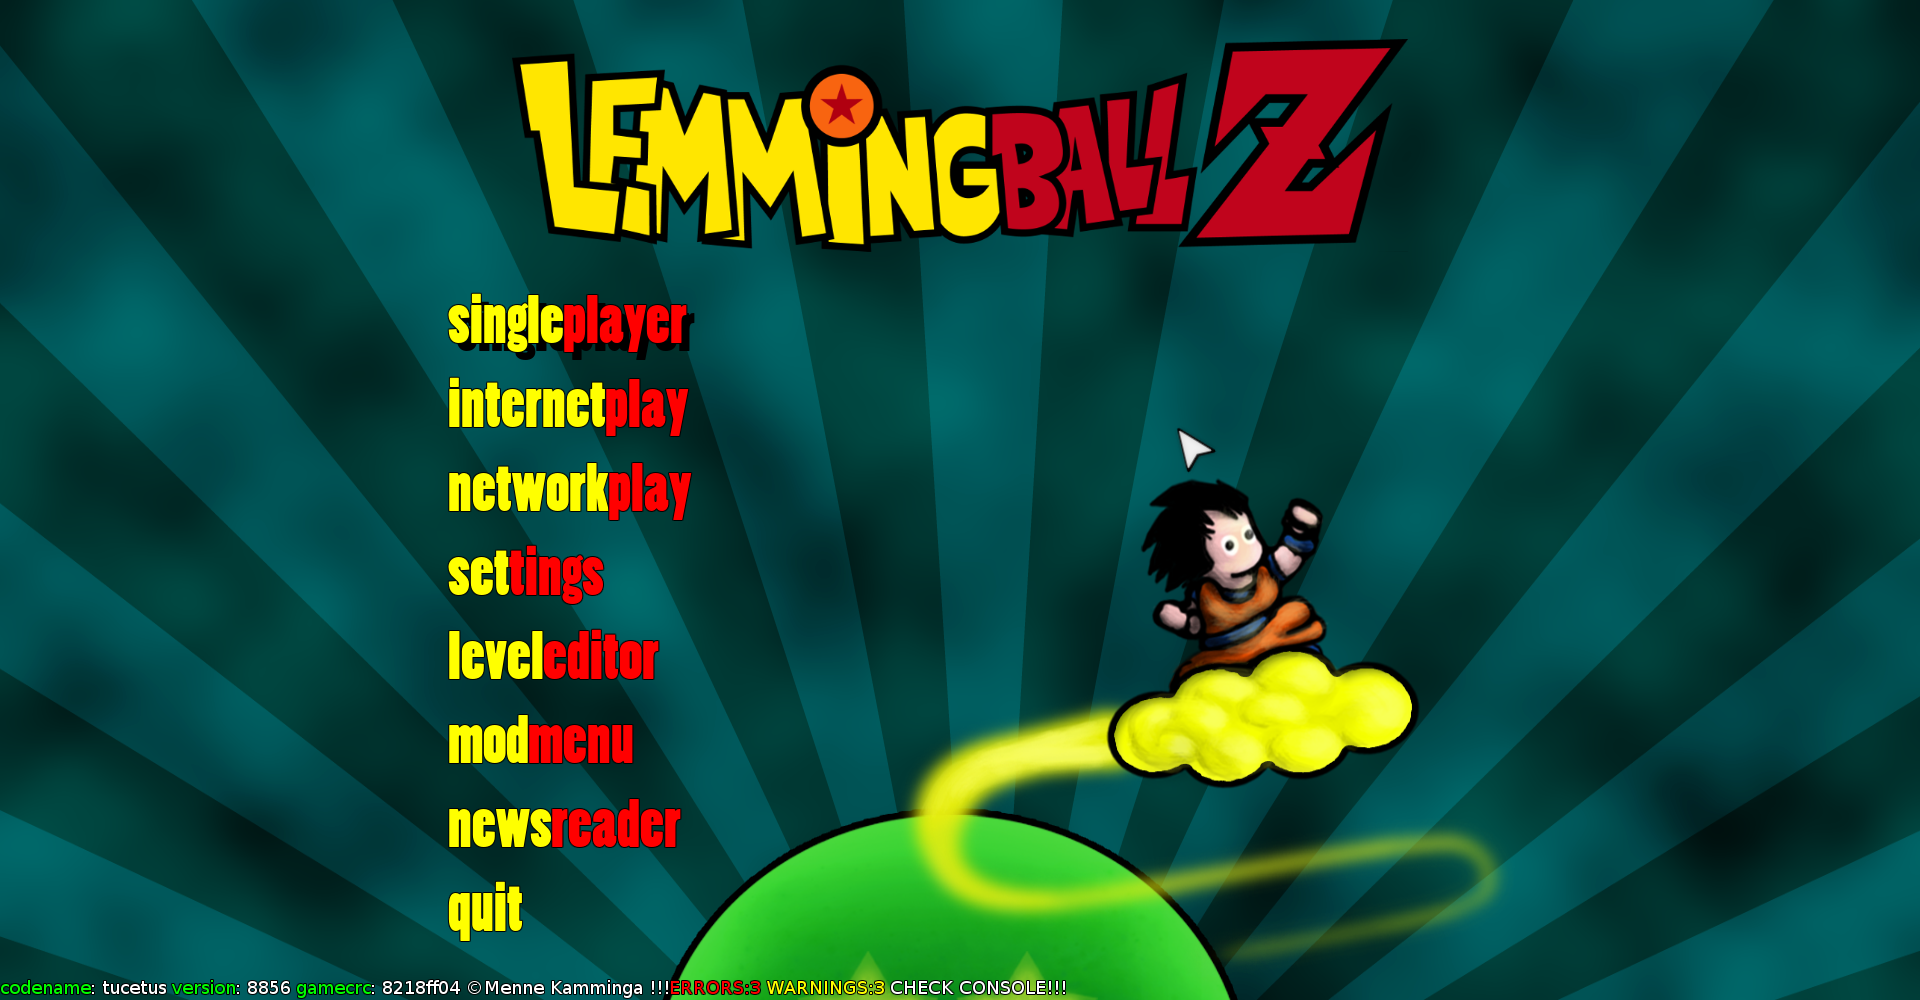 Lemmingball Z Headquarters – The moddable parody fighting game!